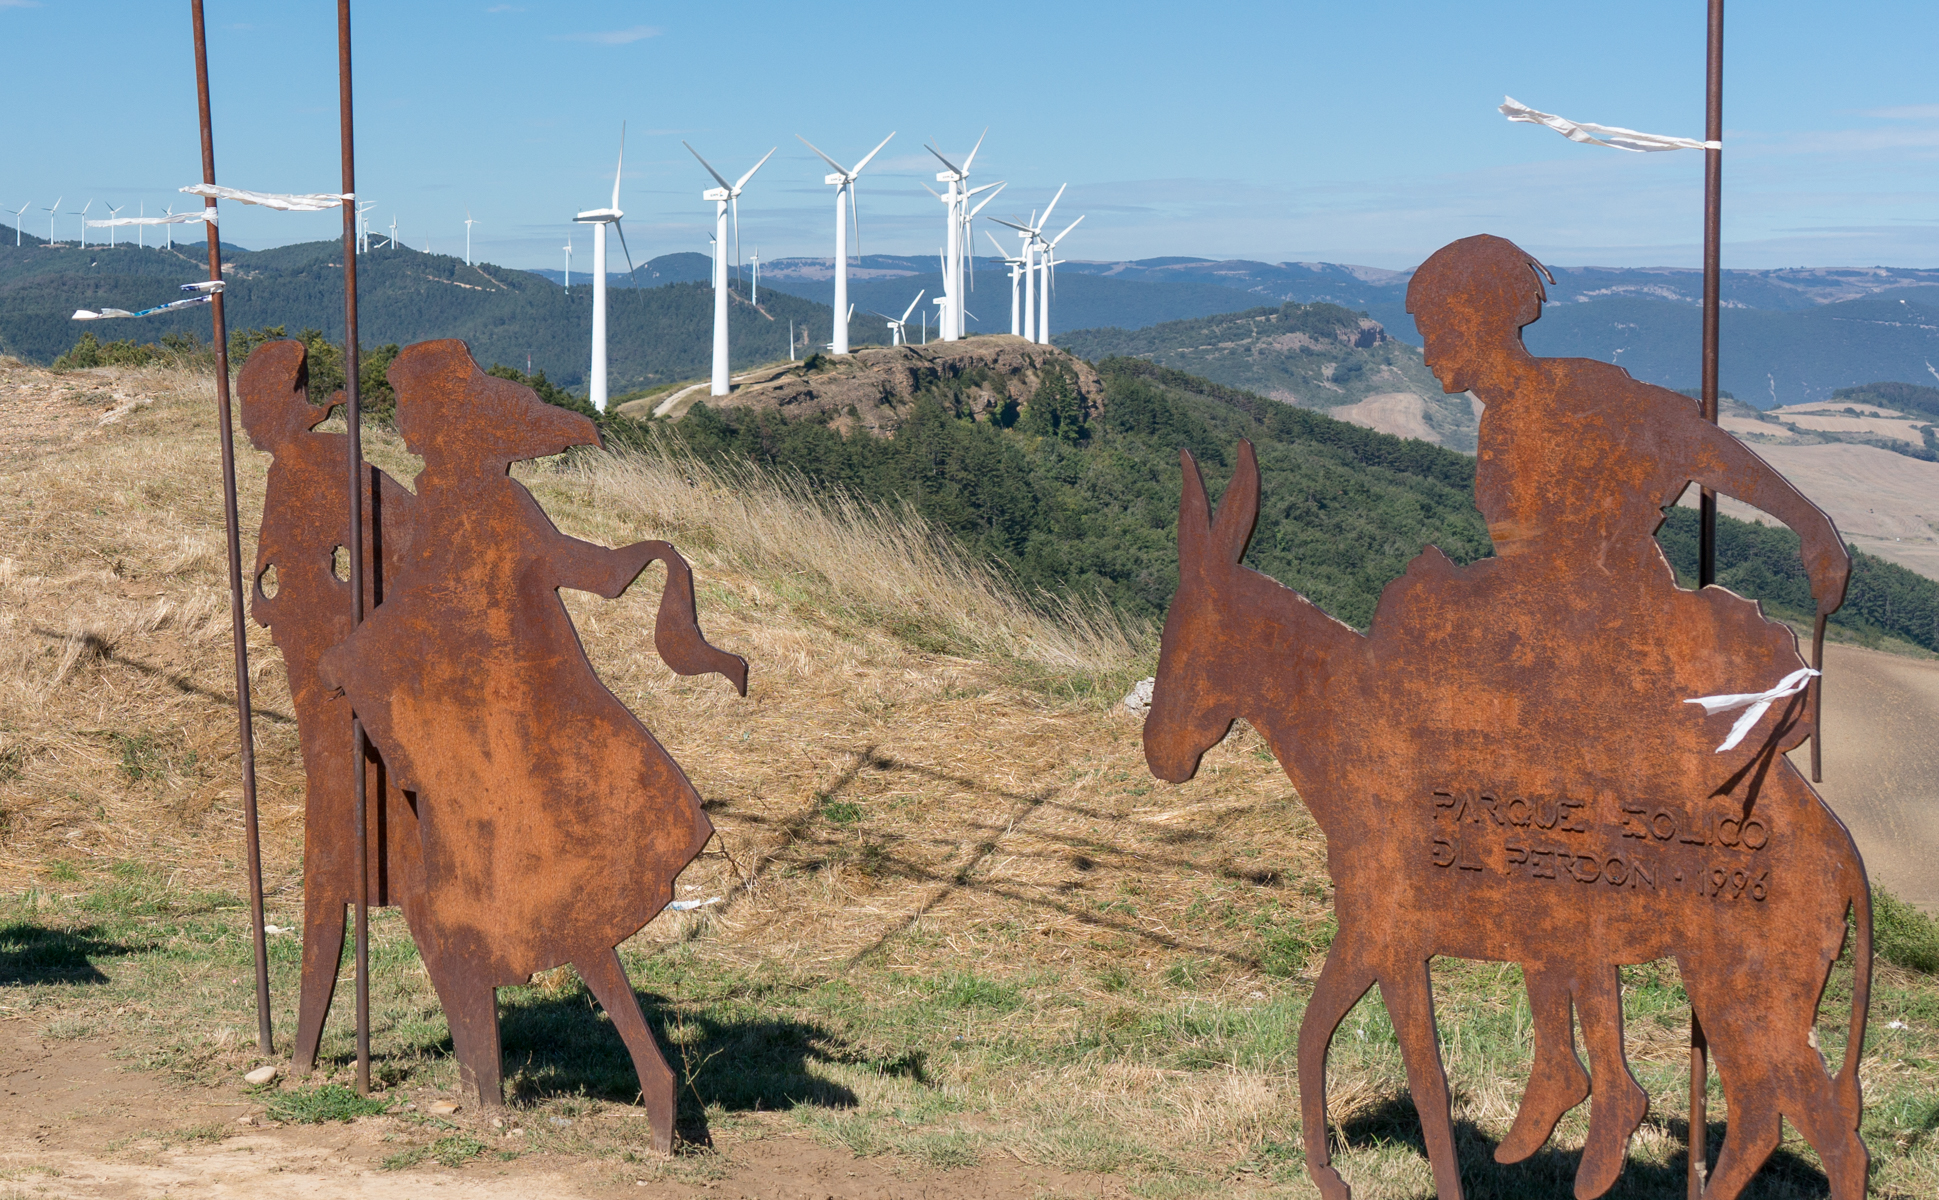 Vicente Galbete’s iron sculpture on the Camino Francés at summit crossing of Alto del Perdón, Spain | Photo by Mike Hudak